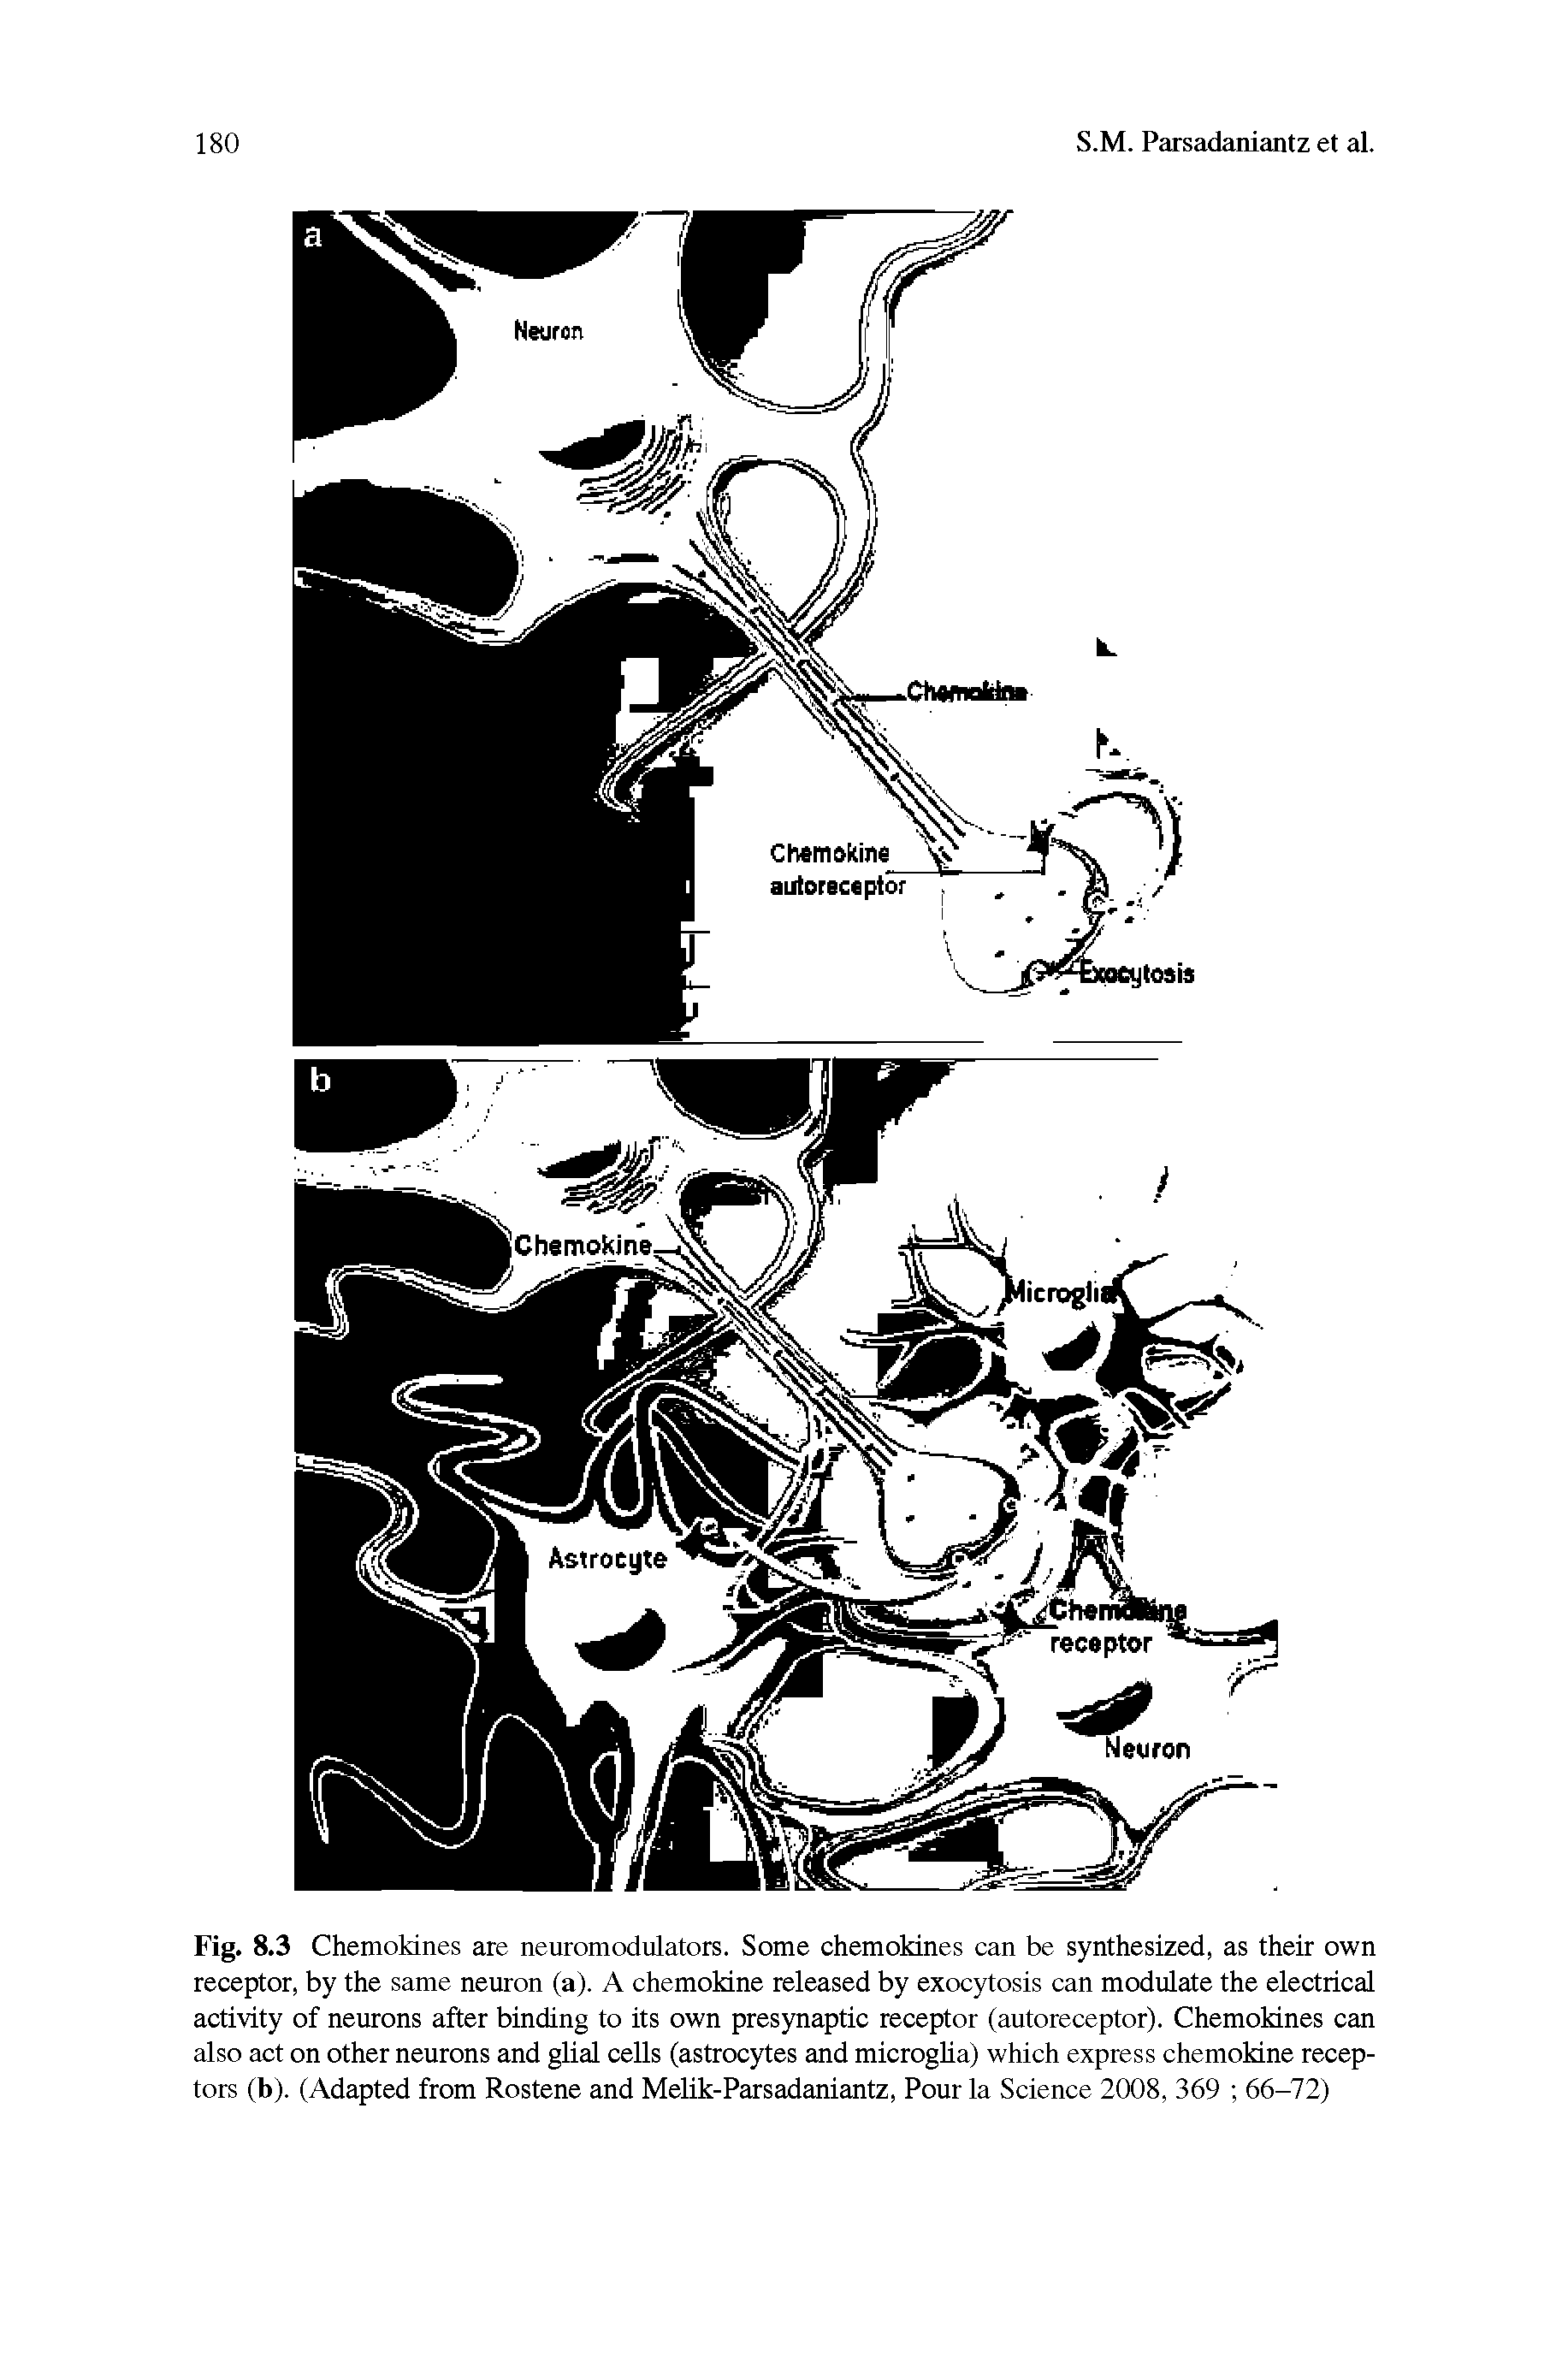 Fig. 8.3 Chemokines are neuromodulators. Some chemokines can be synthesized, as their own receptor, by the same neuron (a). A chemokine released by exocytosis can modulate the electrical activity of neurons after binding to its own presynaptic receptor (autoreceptor). Chemokines can also act on other neurons and glial cells (astrocytes and microgha) which express chemokine receptors (b). (Adapted from Rostene and Melik-Parsadaniantz, Pour la Science 2008, 369 66-72)...